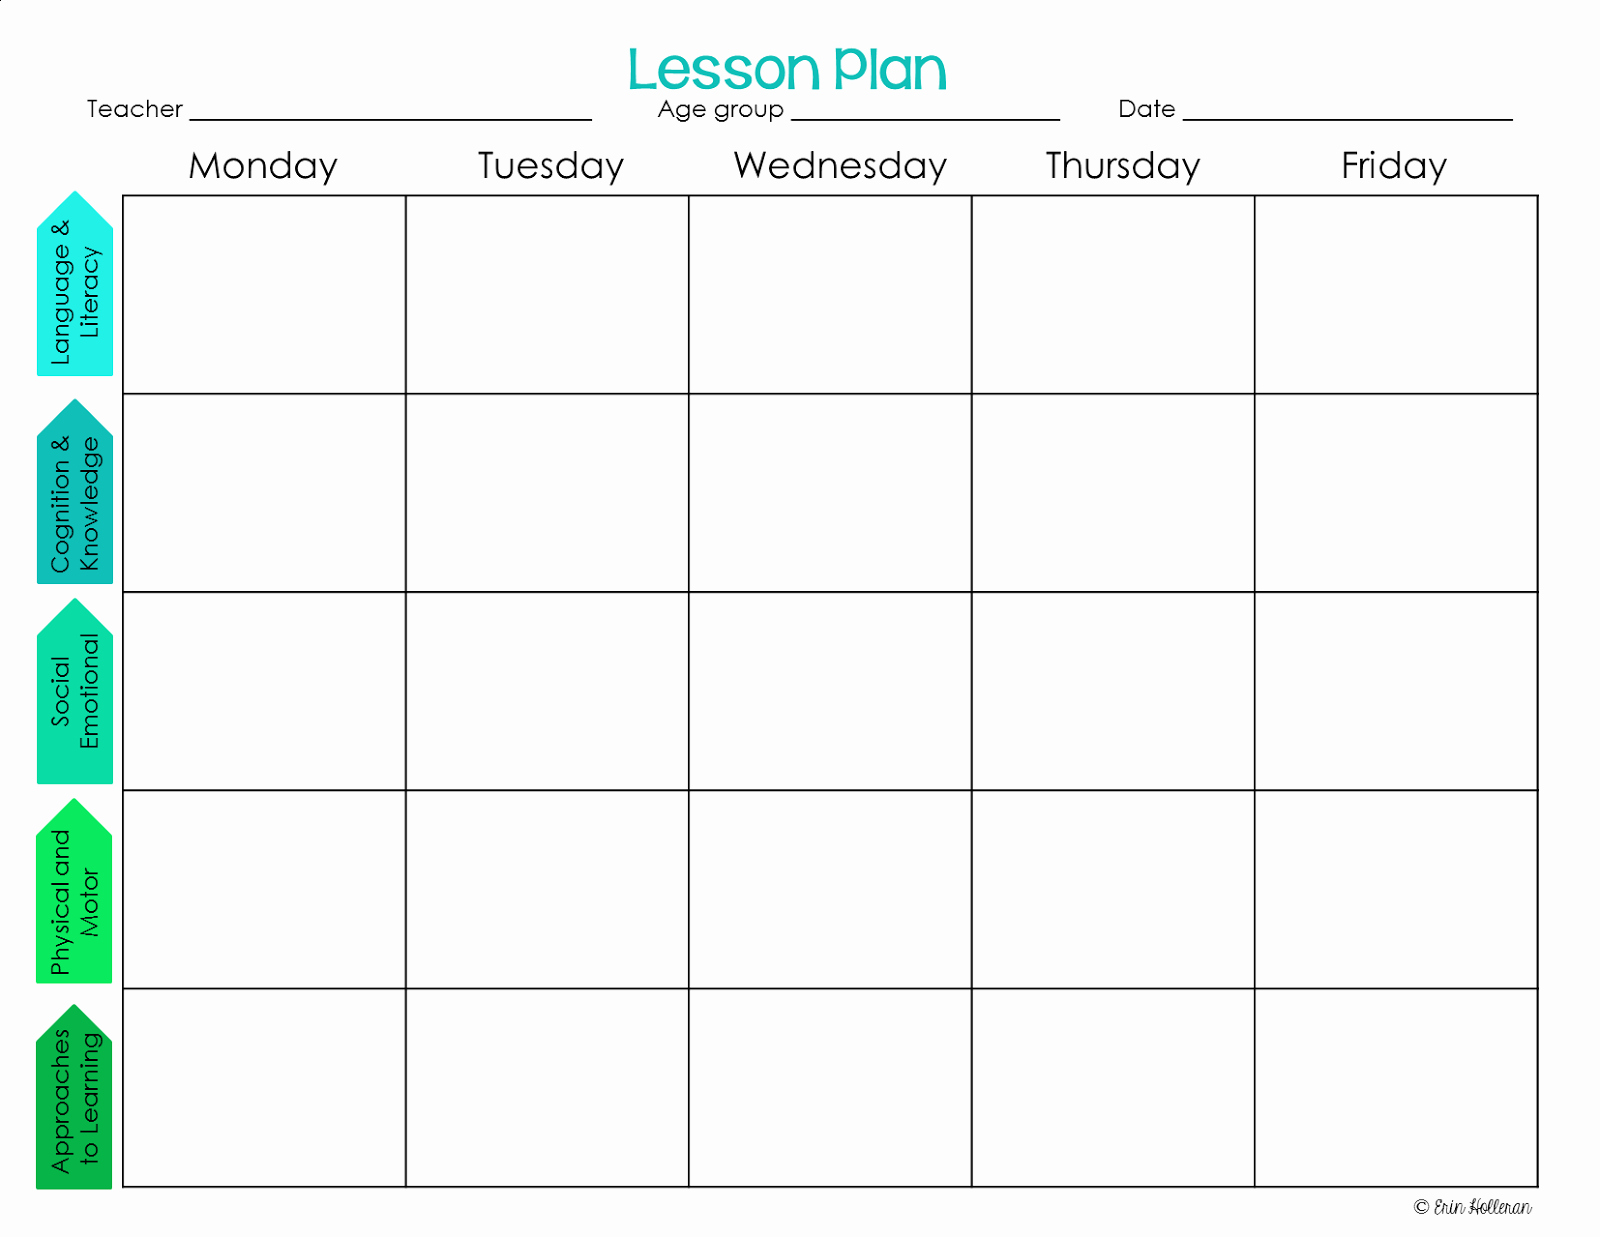 Lesson Plans Templates for toddlers Unique Preschool Ponderings Make Your Lesson Plans Work for You